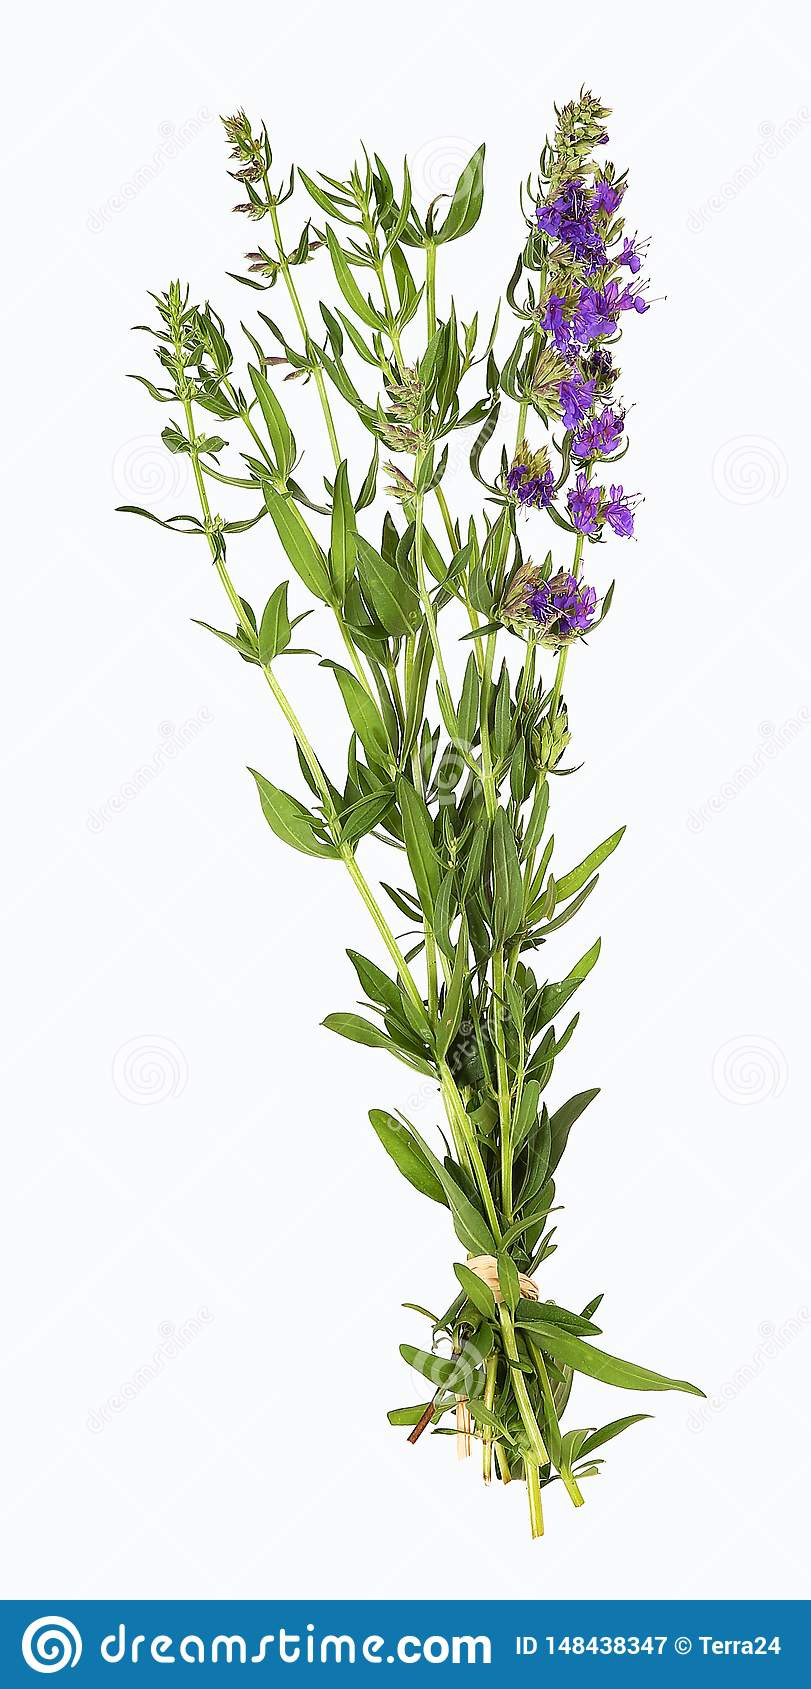 Hyssop Herb Plant, Isolated Stock Image – Image Of Leafs, Stalk